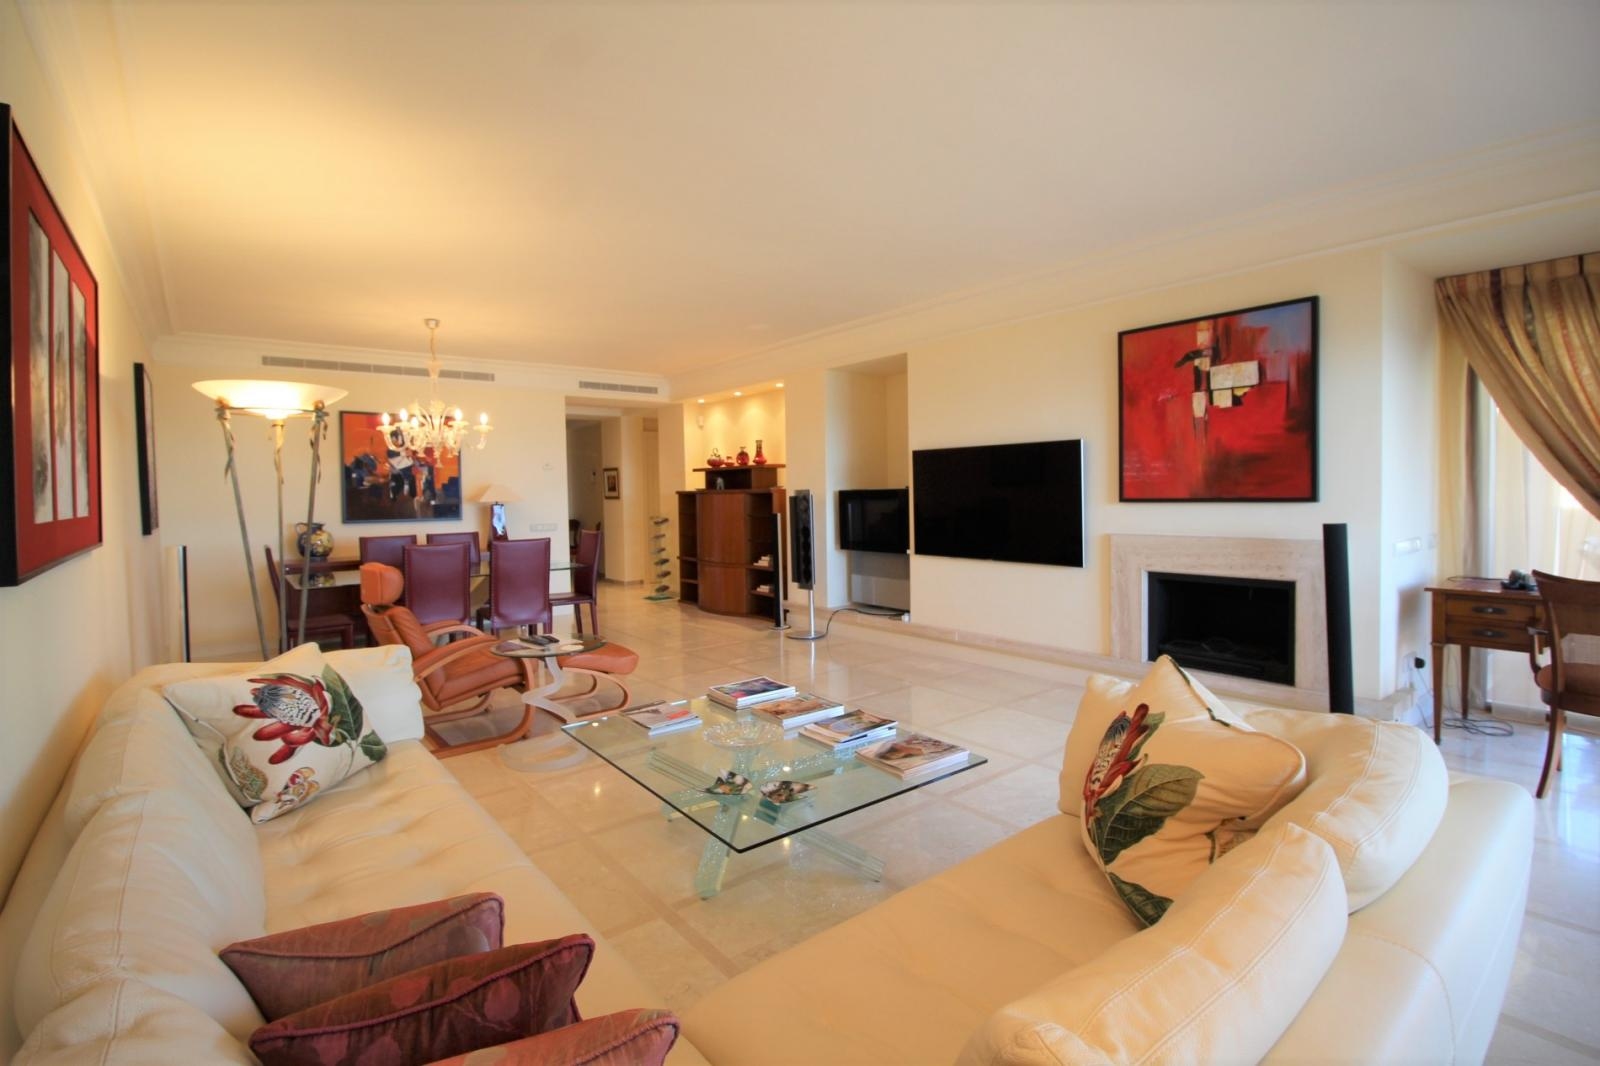 SOLD! SPECTACULAR PENTHOUSE ON THE BEACHFRONT, LOCATED IN COSTALITA - MARBELLA